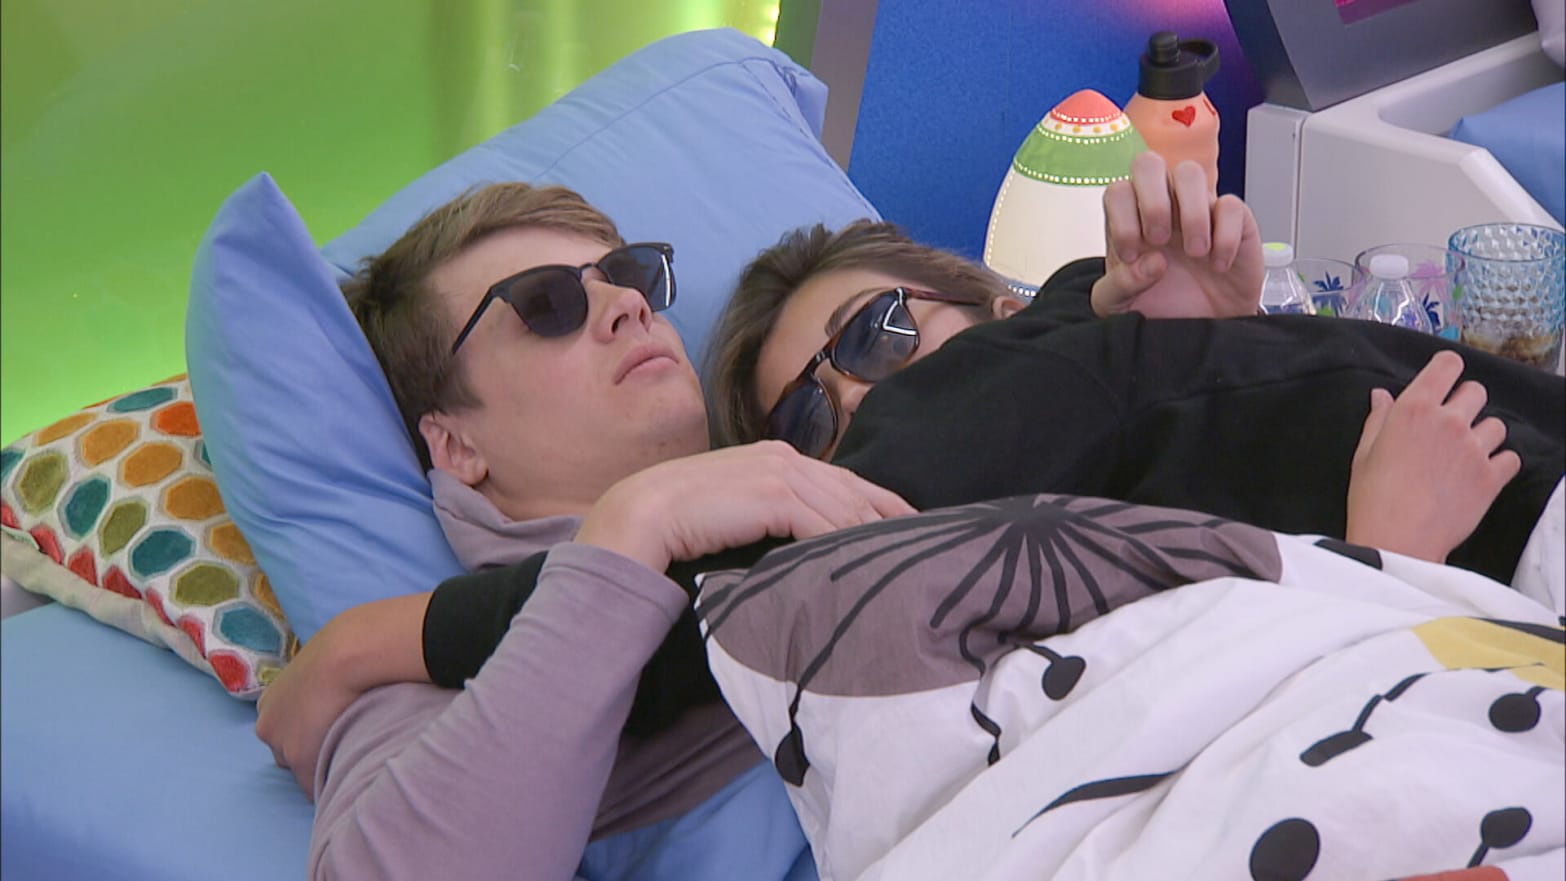 Force Fuck Sleeping Sister Video - Big Brother' Kyle and Alyssa Having Sex on Pool Floats Scarred Me for Life